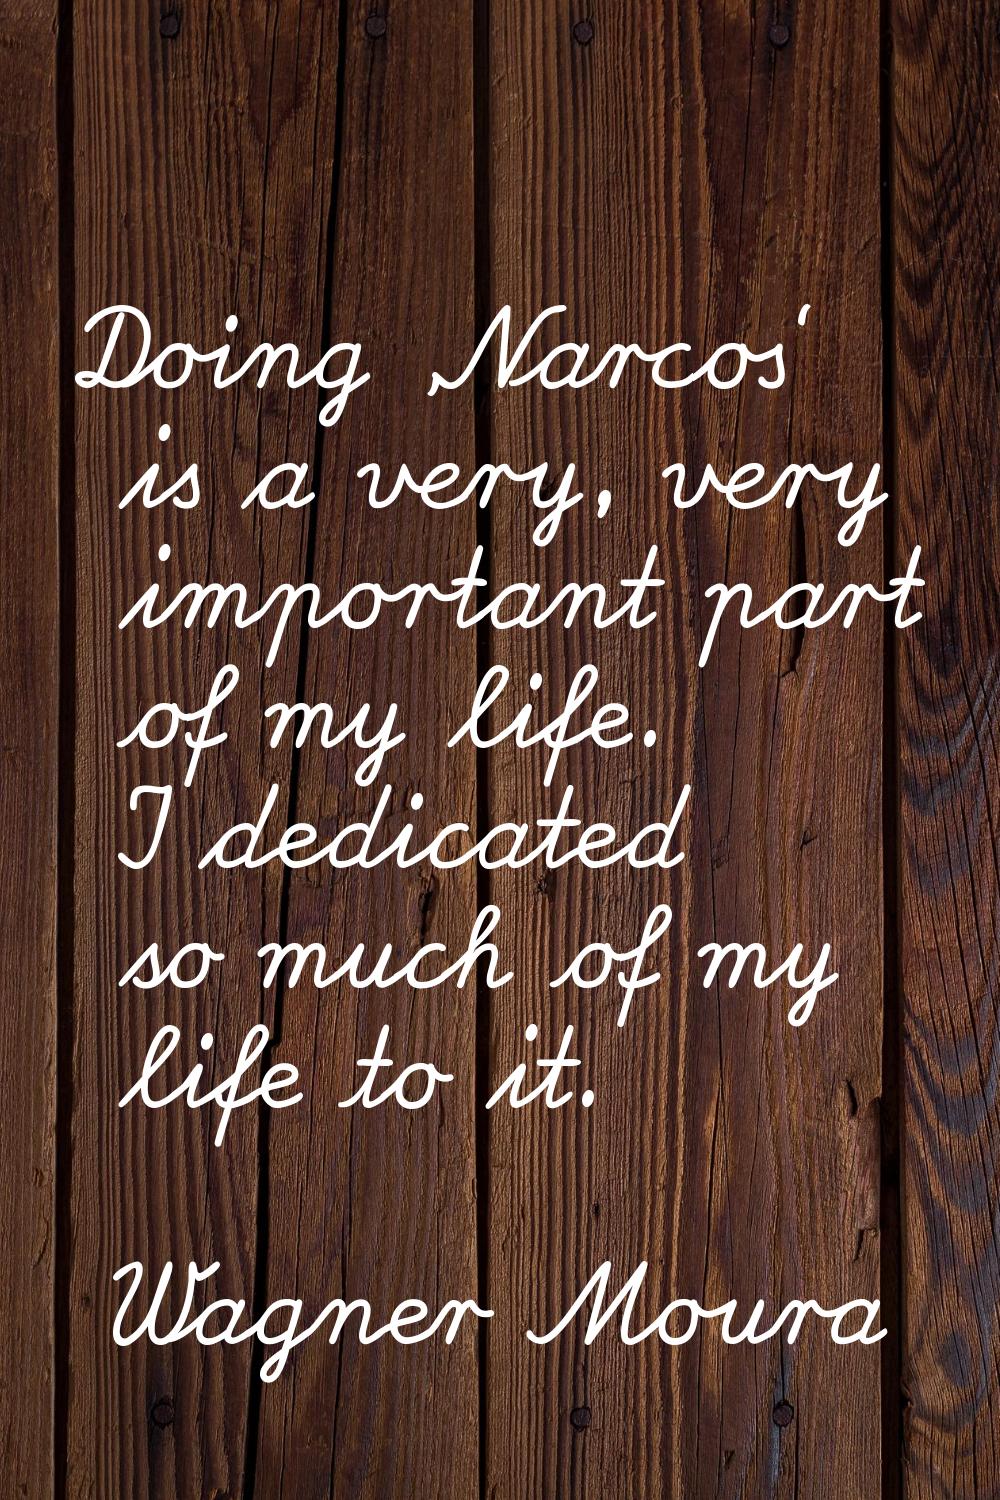 Doing 'Narcos' is a very, very important part of my life. I dedicated so much of my life to it.